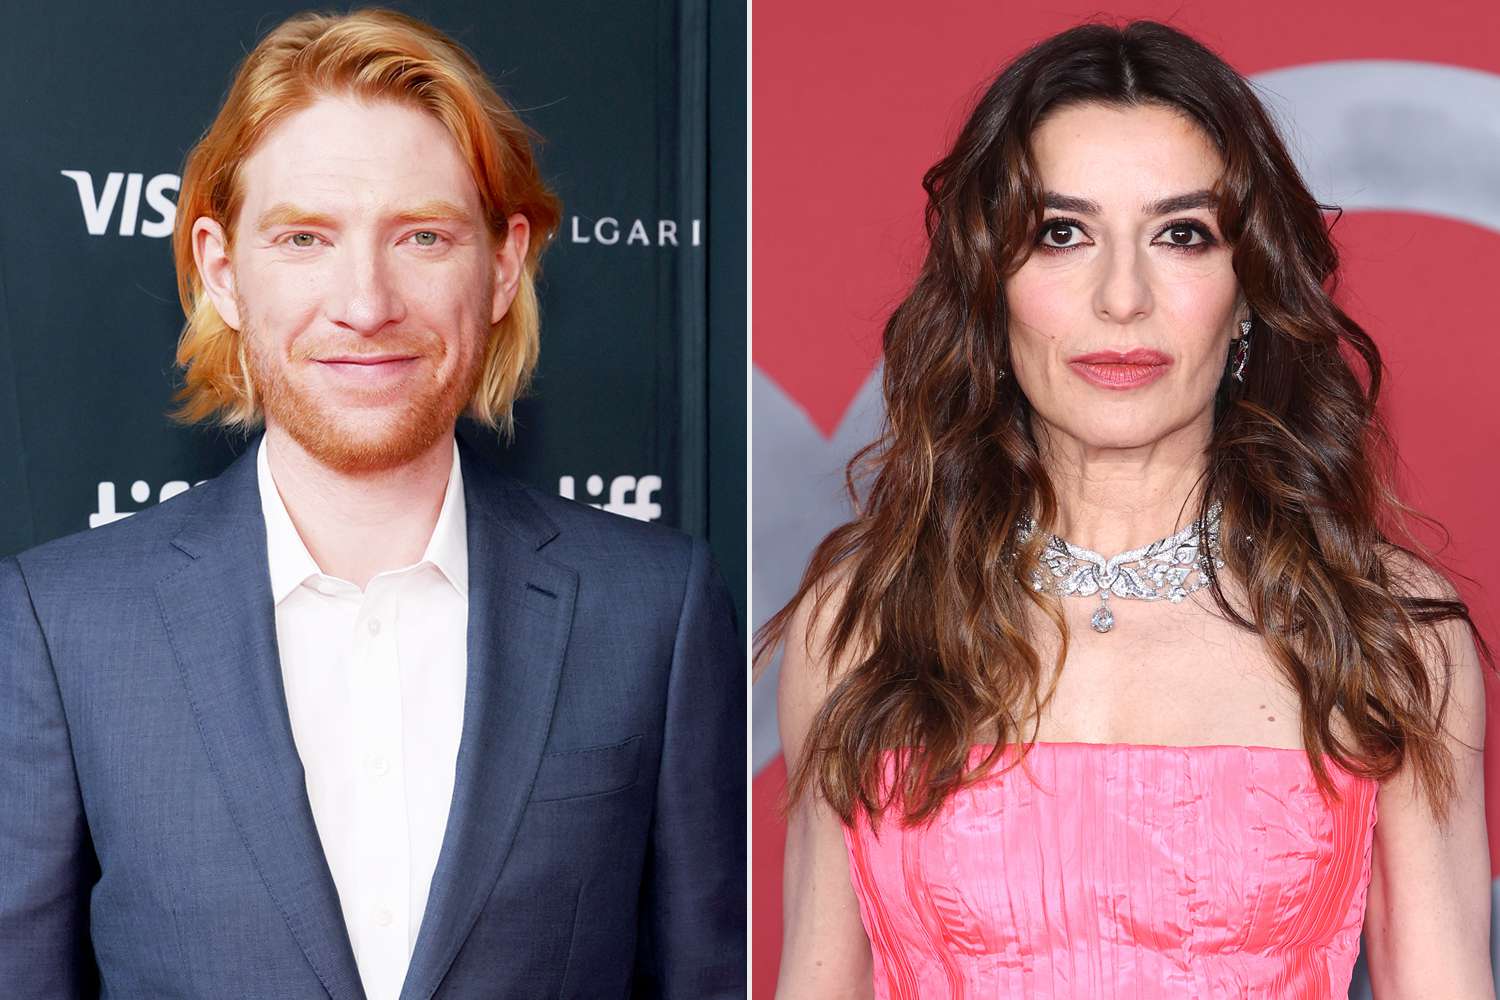 “The Office” Gets New Spinoff Series Starring “The White Lotus”’ Sabrina Impacciatore and Domhnall Gleeson